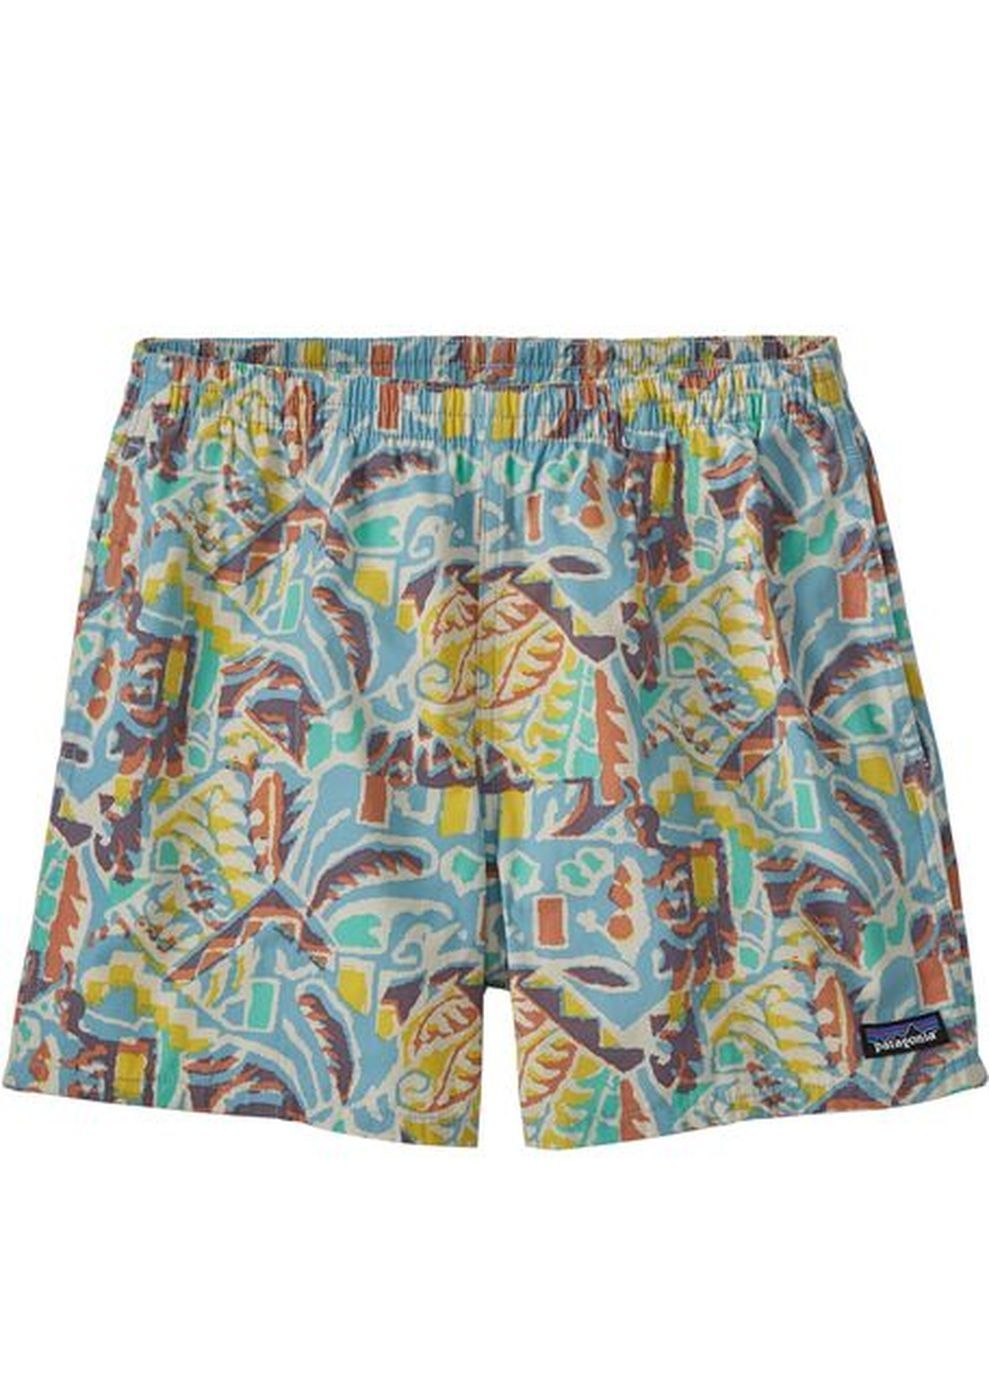 Patagonia_W's Funhoggers shorts_A.S.Adventure_€70